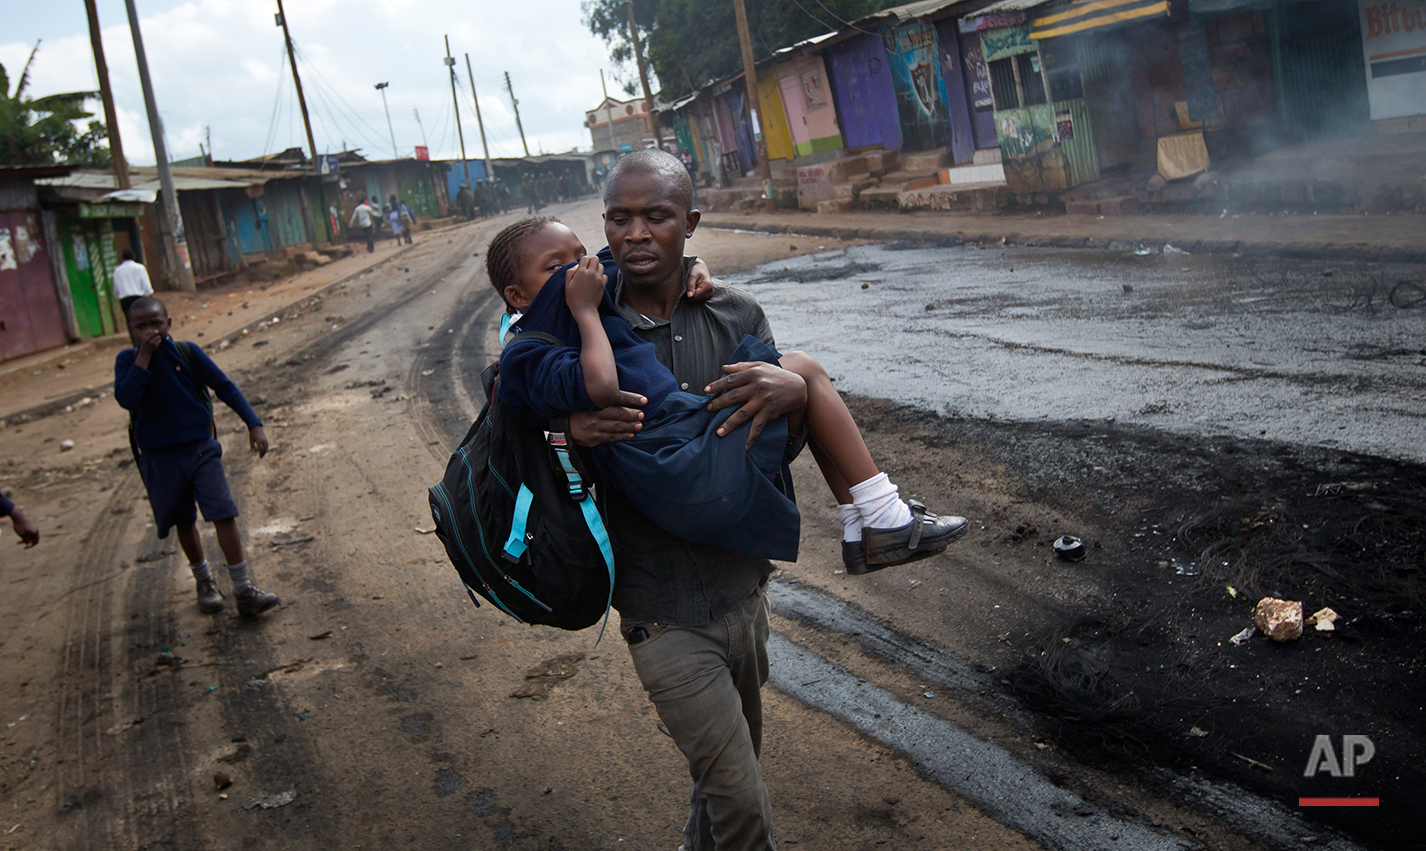  A man carries a schoolgirl overcome by tear gas to safety, past the charred remains of a burning barricade, as police firing tear gas engage protesters throwing rocks in the Kibera slum of Nairobi, Kenya Monday, May 23, 2016. Kenya's police shot, be